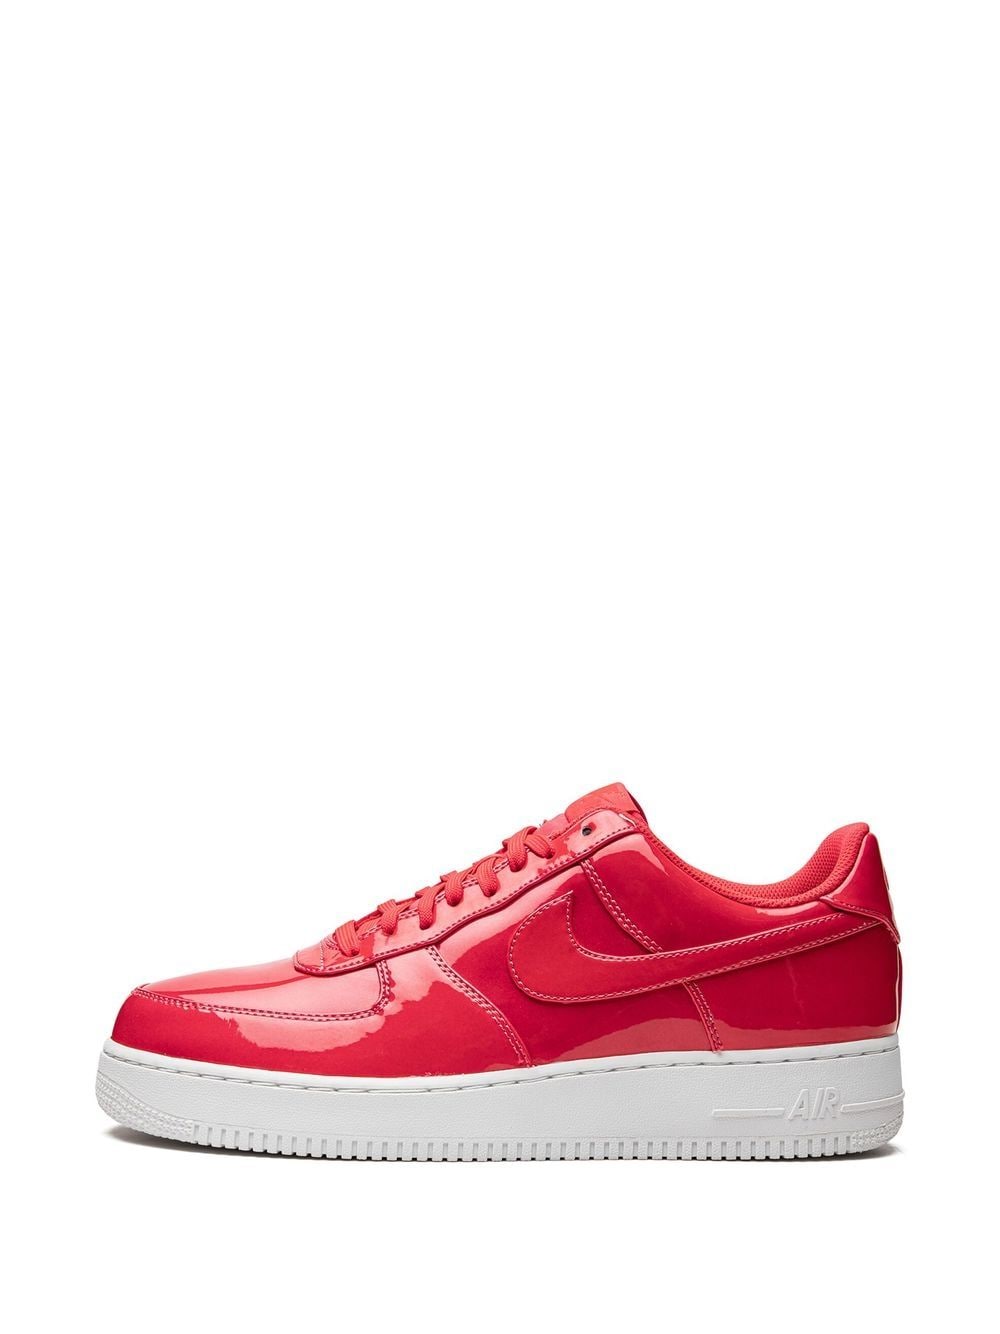 Nike Air Force 1 07 LV8 Triple Gym Red White PATENT Leather Carbon